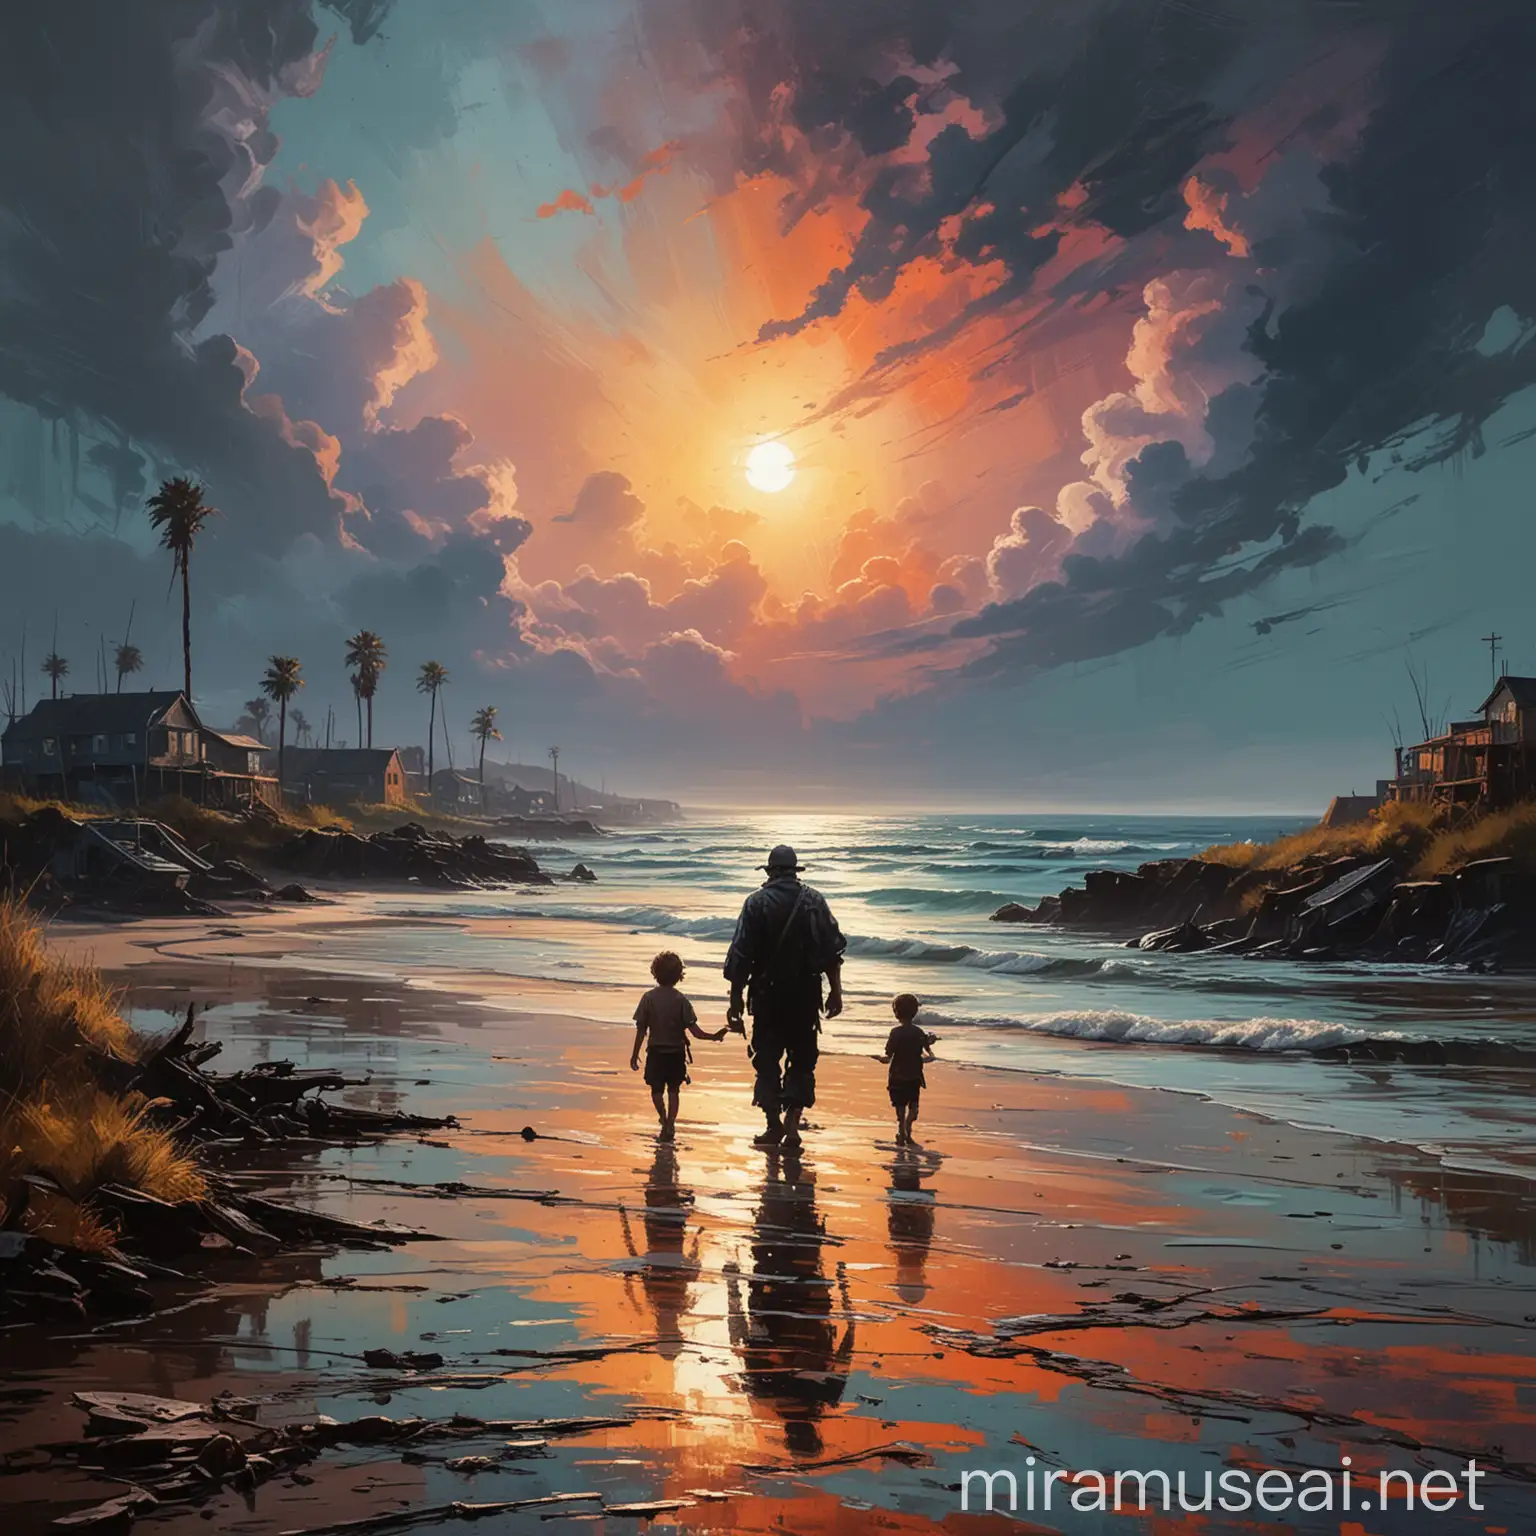 impressionist interpretation of a post apocalyptic beach town landscape with bold colors and distinct brushstrokes, vibrant, textured, atmospheric, the silhouette of sea father with his two childeren